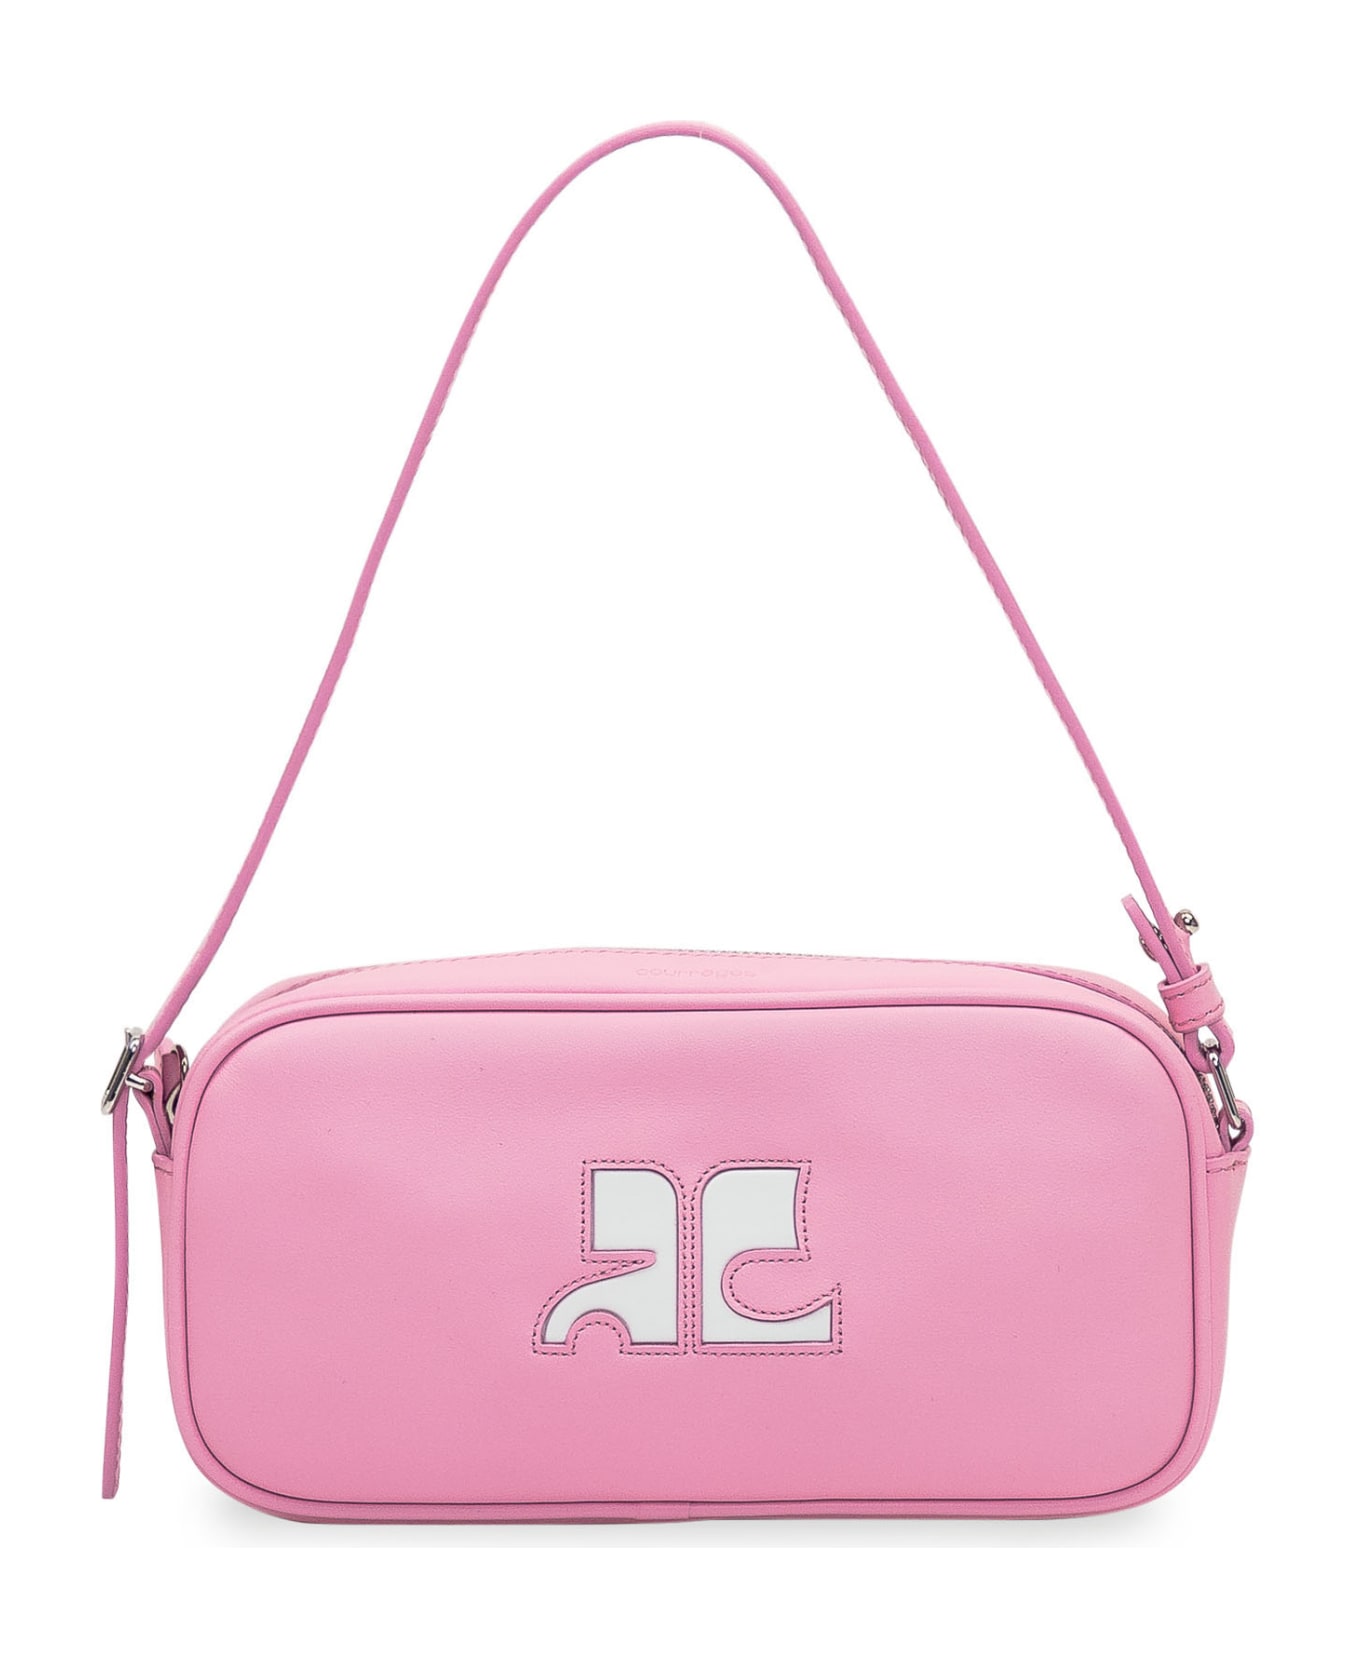 Courrèges Ac Bag - CANDY PINK ショルダーバッグ